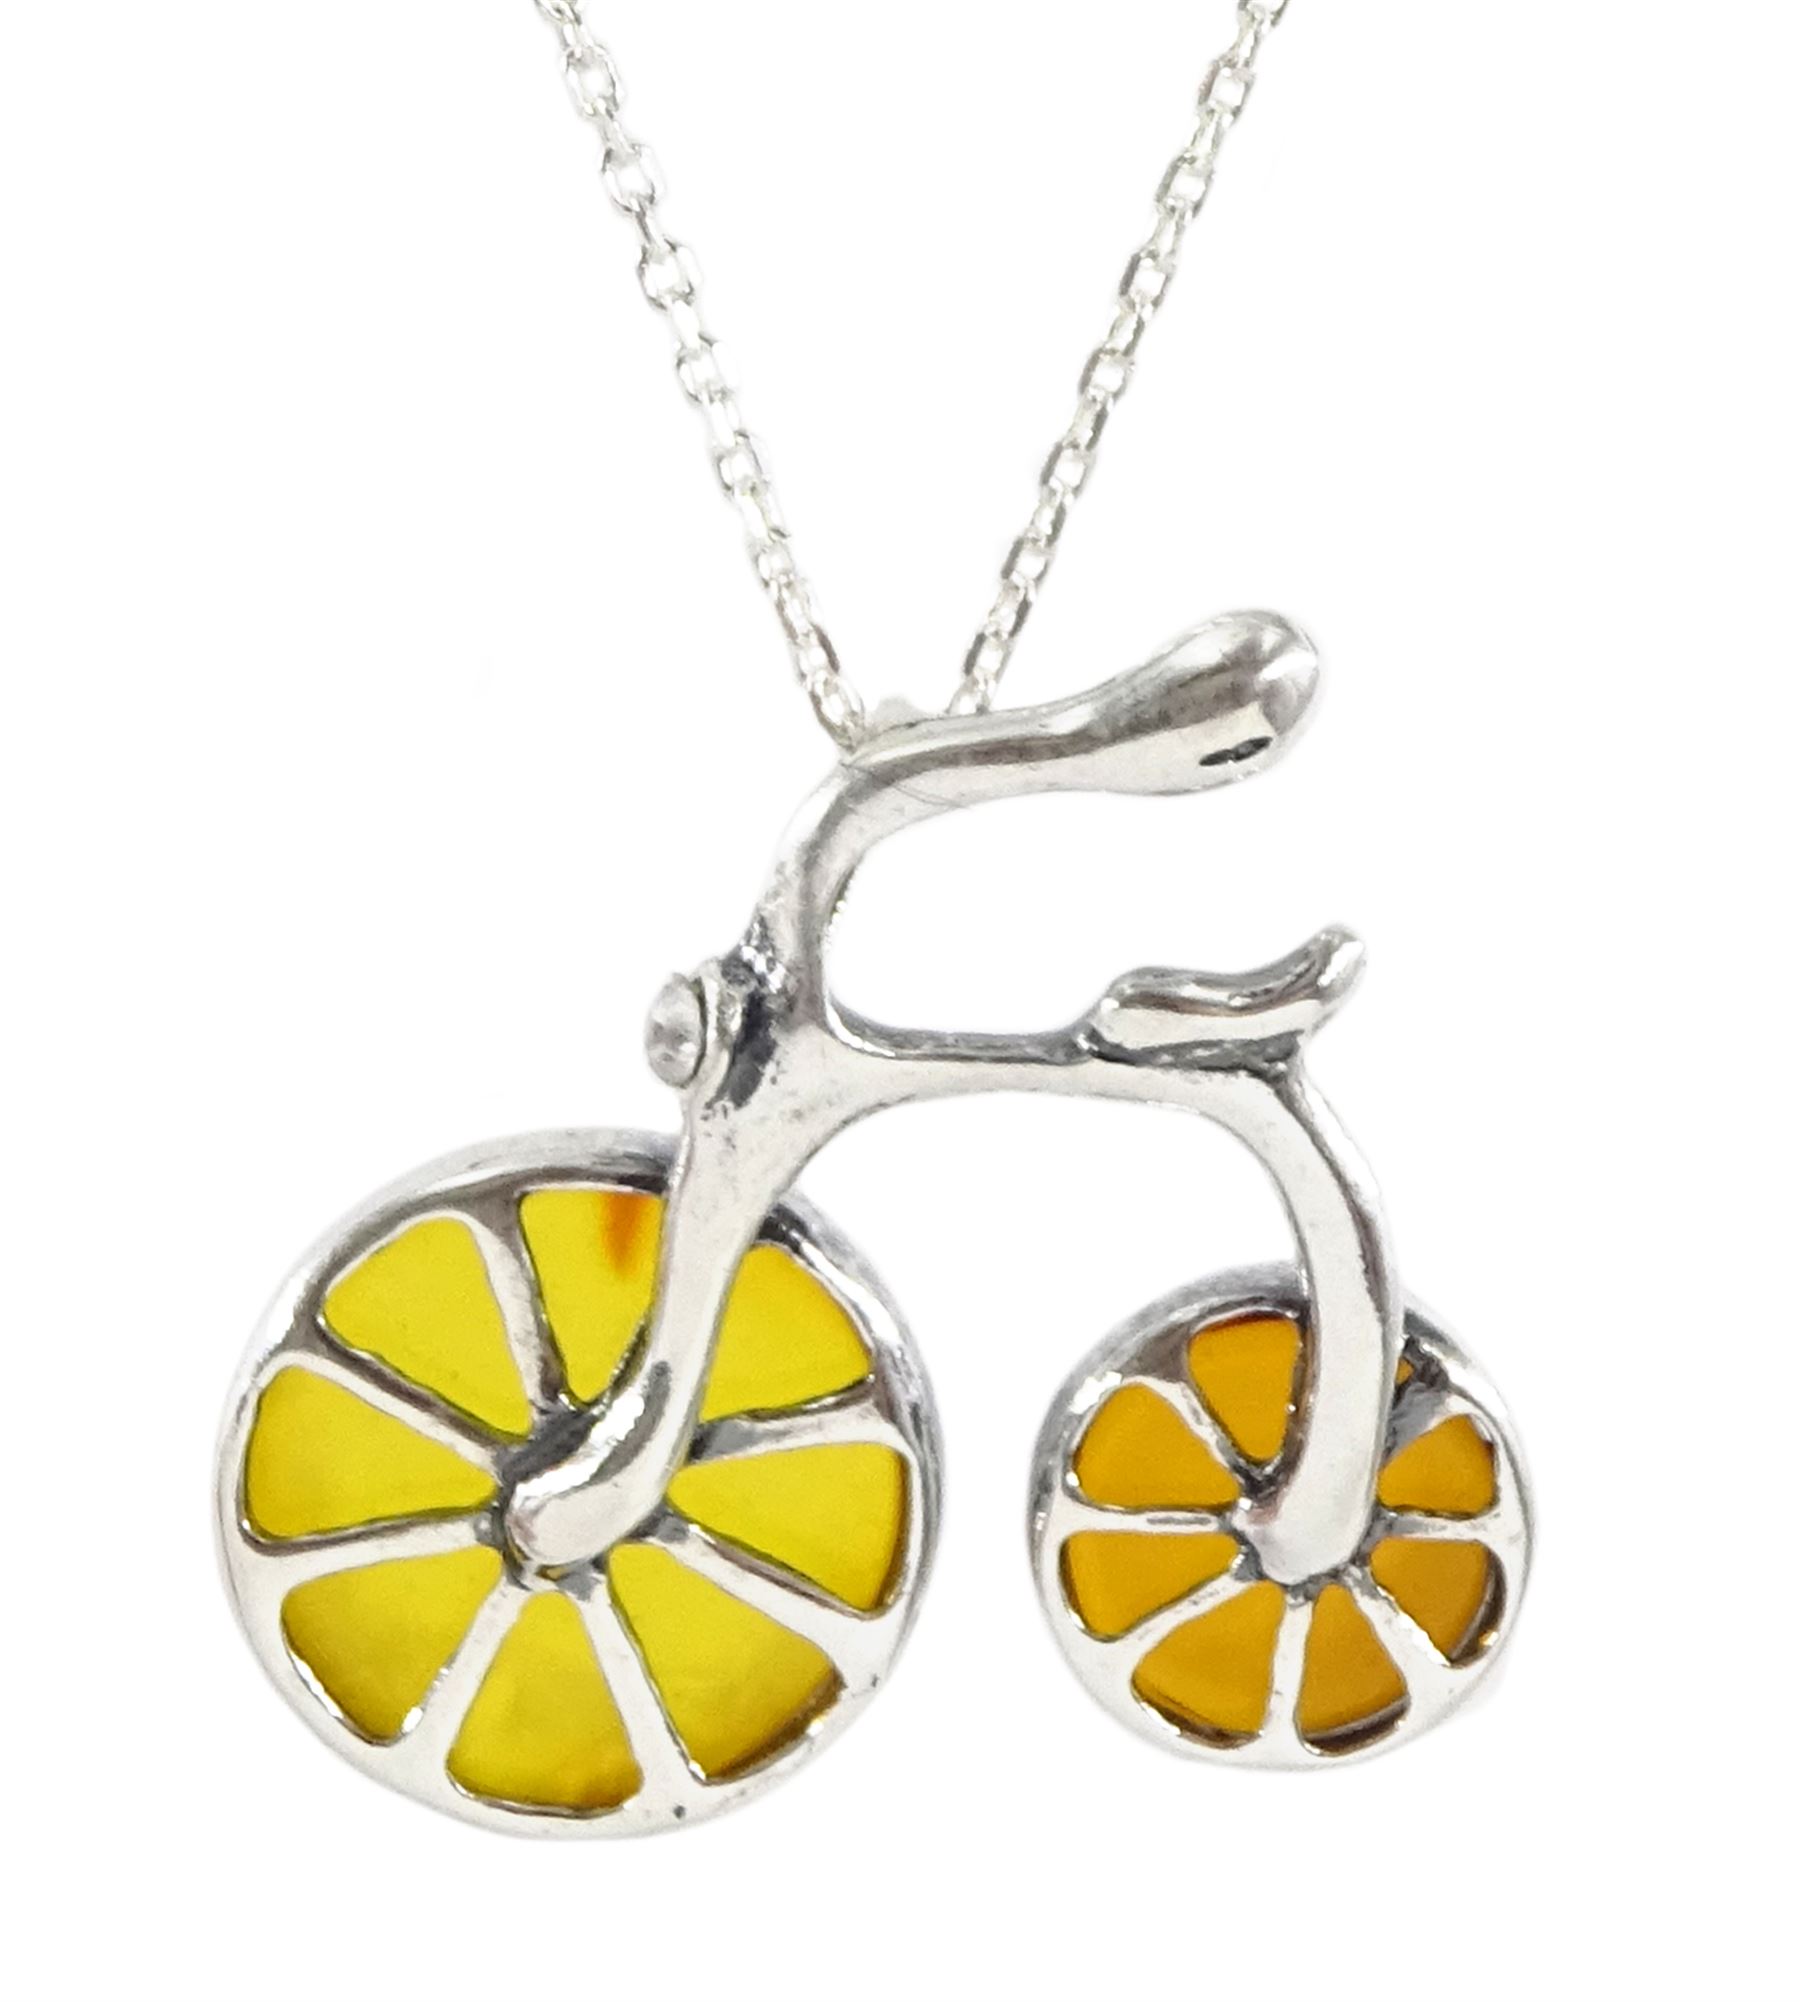 Silver Baltic amber bicycle pendant necklace